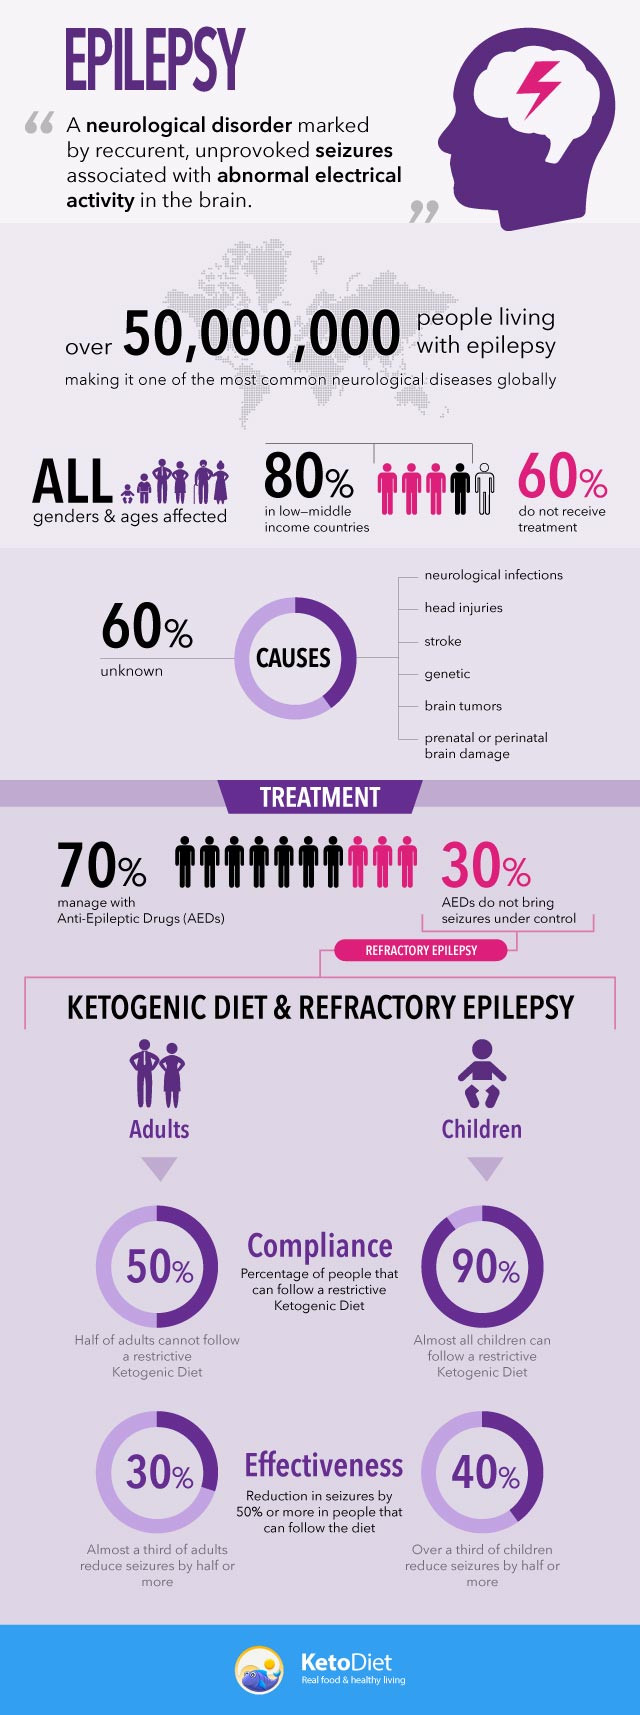 Keto Diet For Seizures
 Can the Ketogenic Diet Help Patients with Epilepsy